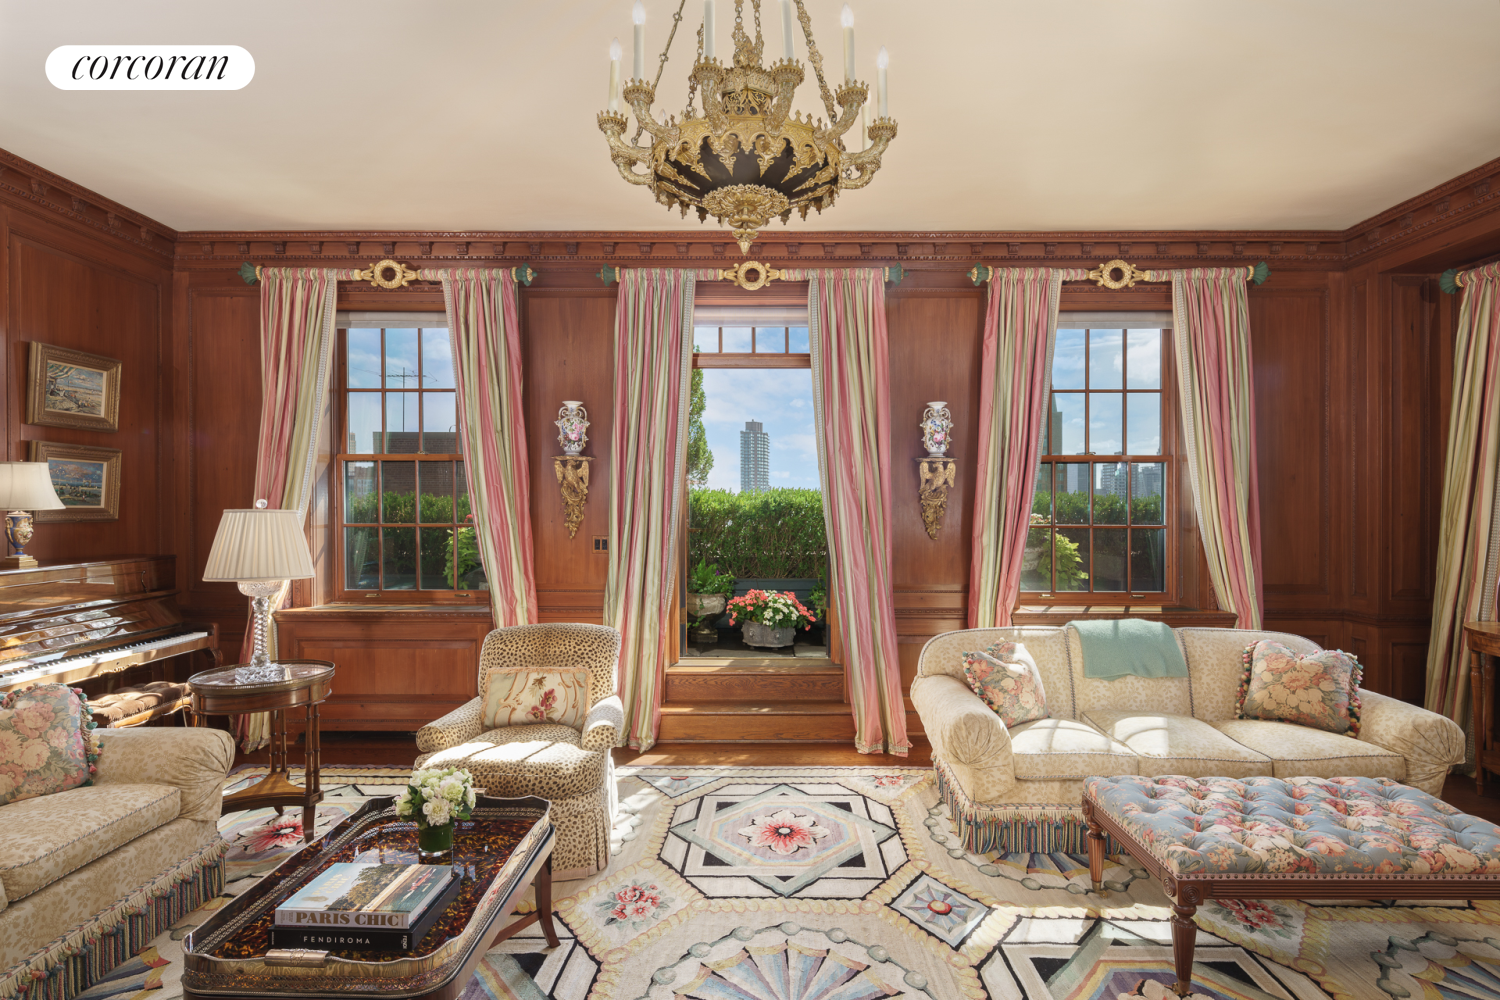 895 Park Avenue Phc, Lenox Hill, Upper East Side, NYC - 6 Bedrooms  
5.5 Bathrooms  
12 Rooms - 